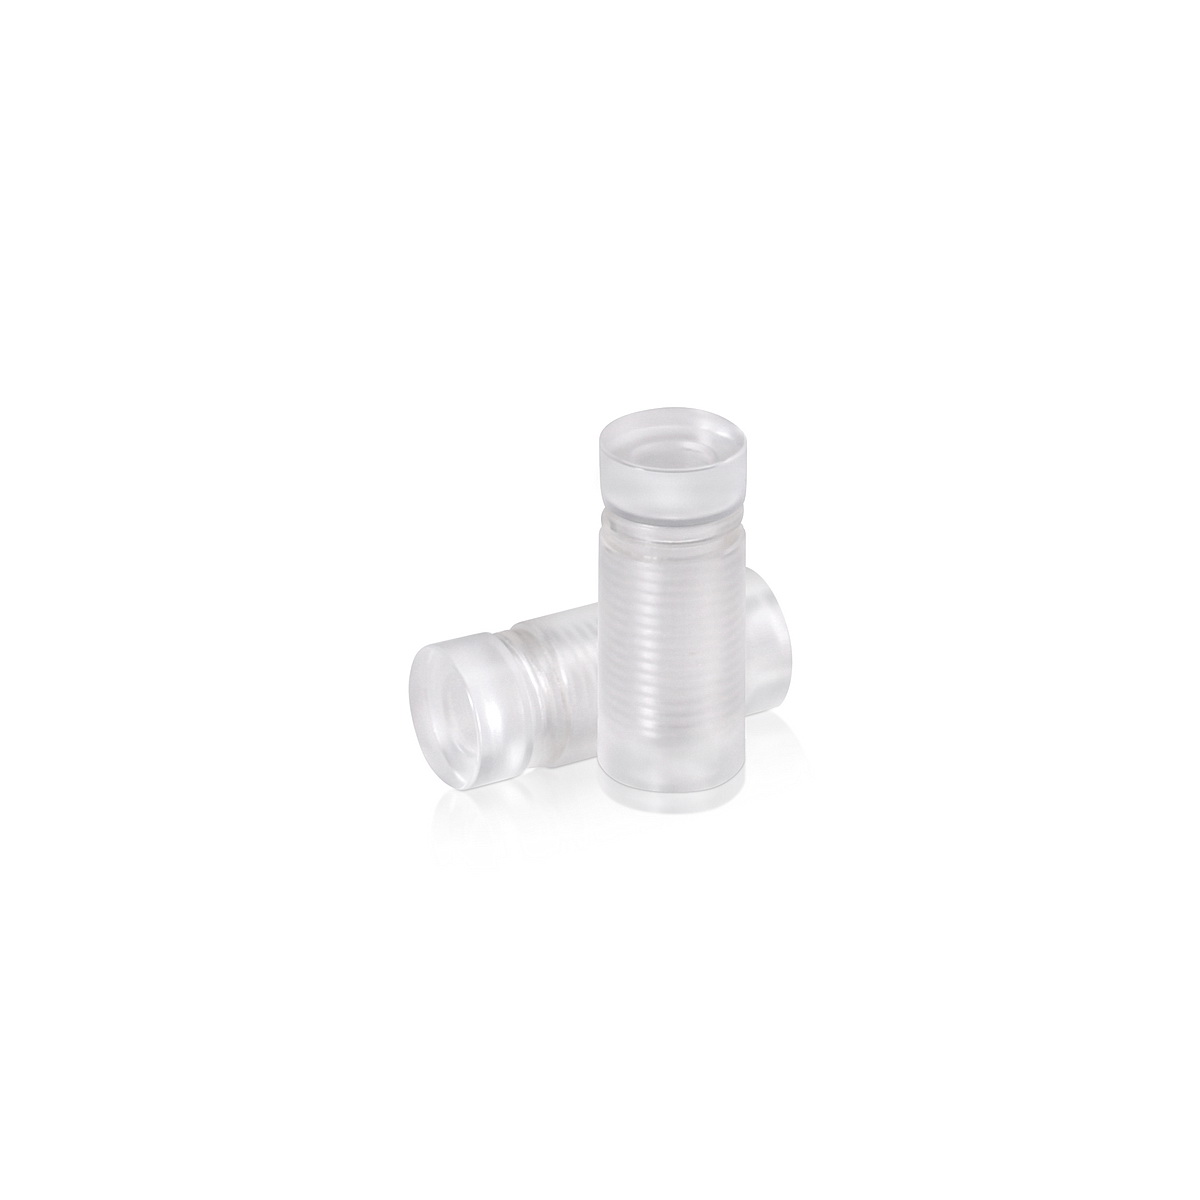 1/2'' Diameter X 1-3/4'' Barrel Length, Clear Acrylic Standoff. Easy Fasten Standoff (For Inside Use Only) Tamper Proof [Required Material Hole Size: 3/8'']